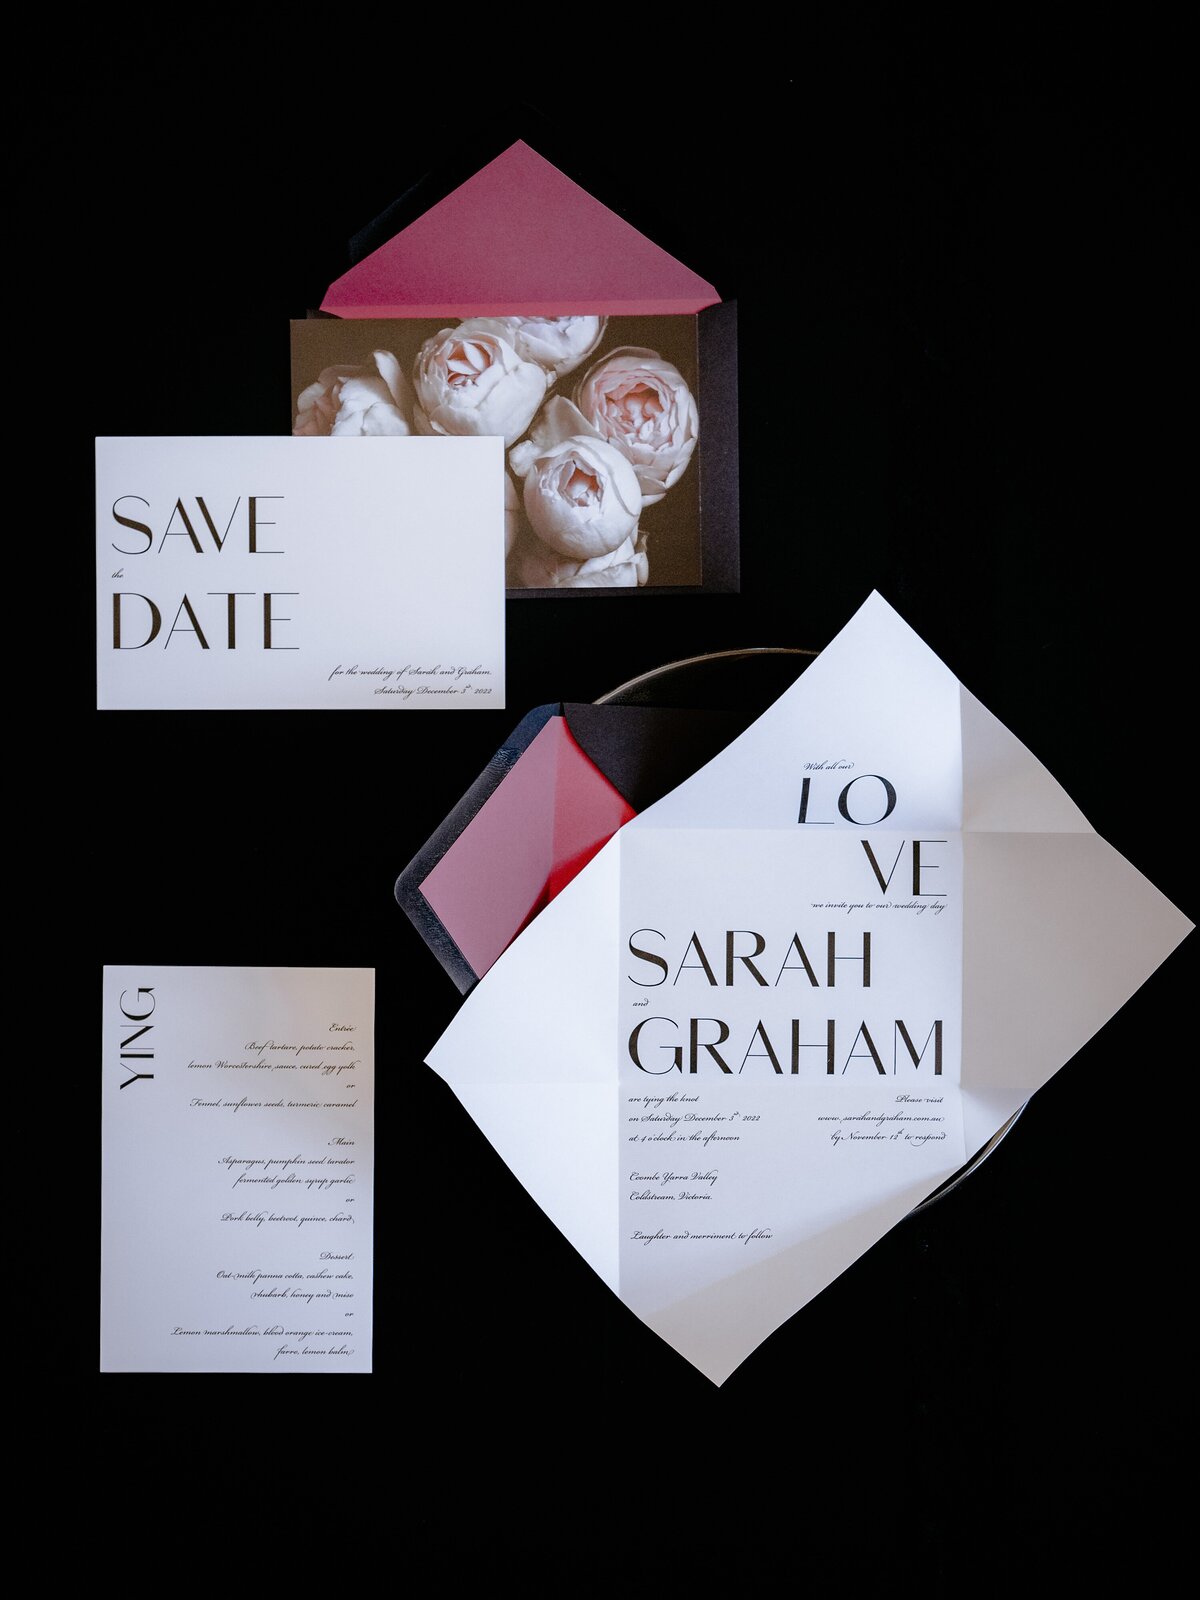 Bold and dark wedding invitations with large block text and dark pink roses, with place card menu and save the date card